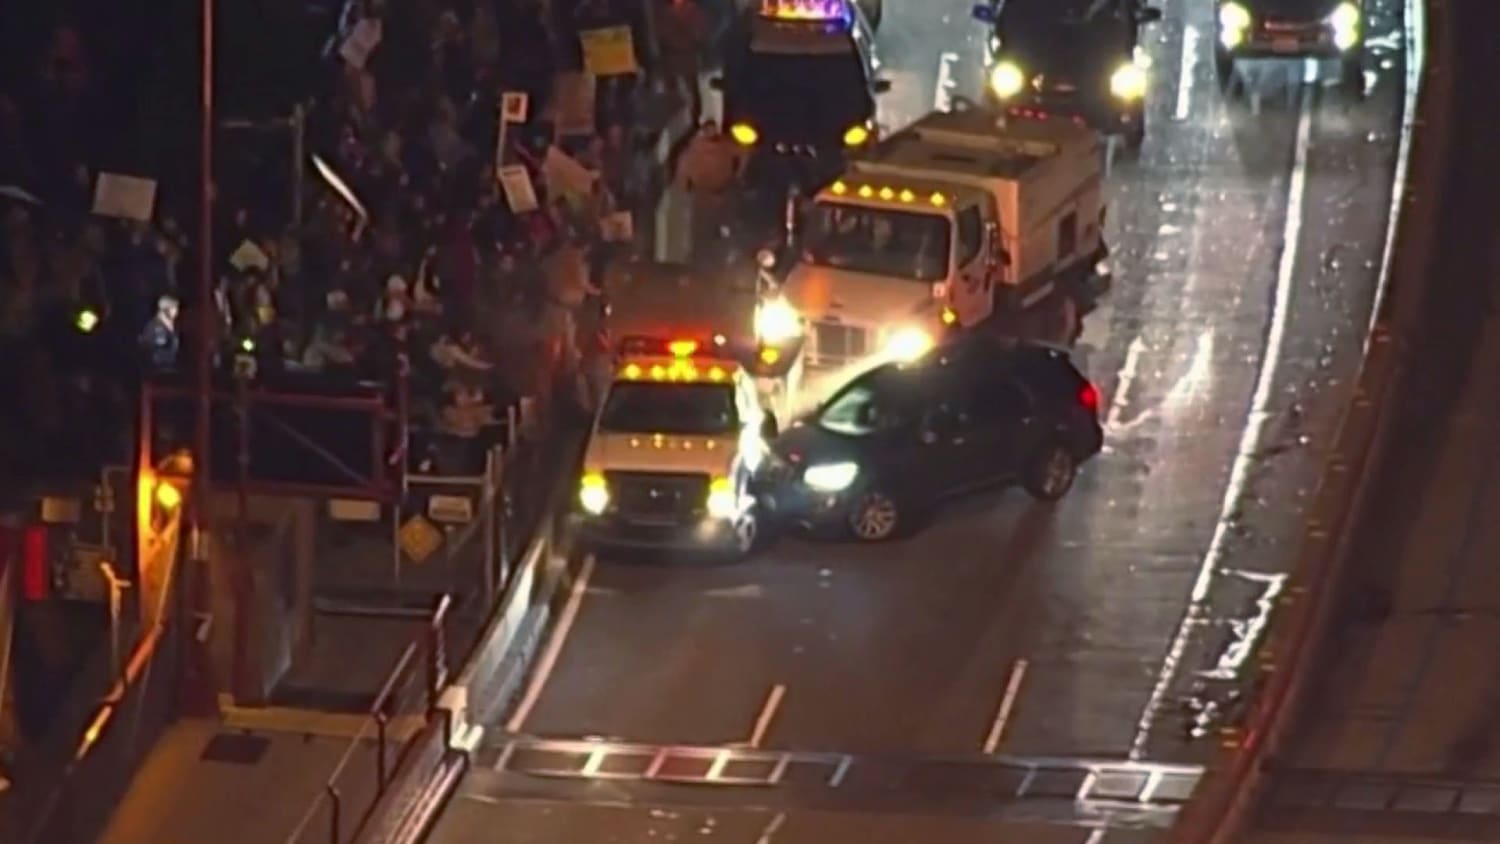 5 hurt, including 2 officers, after crash at anti-vaccine protest in San Francisco